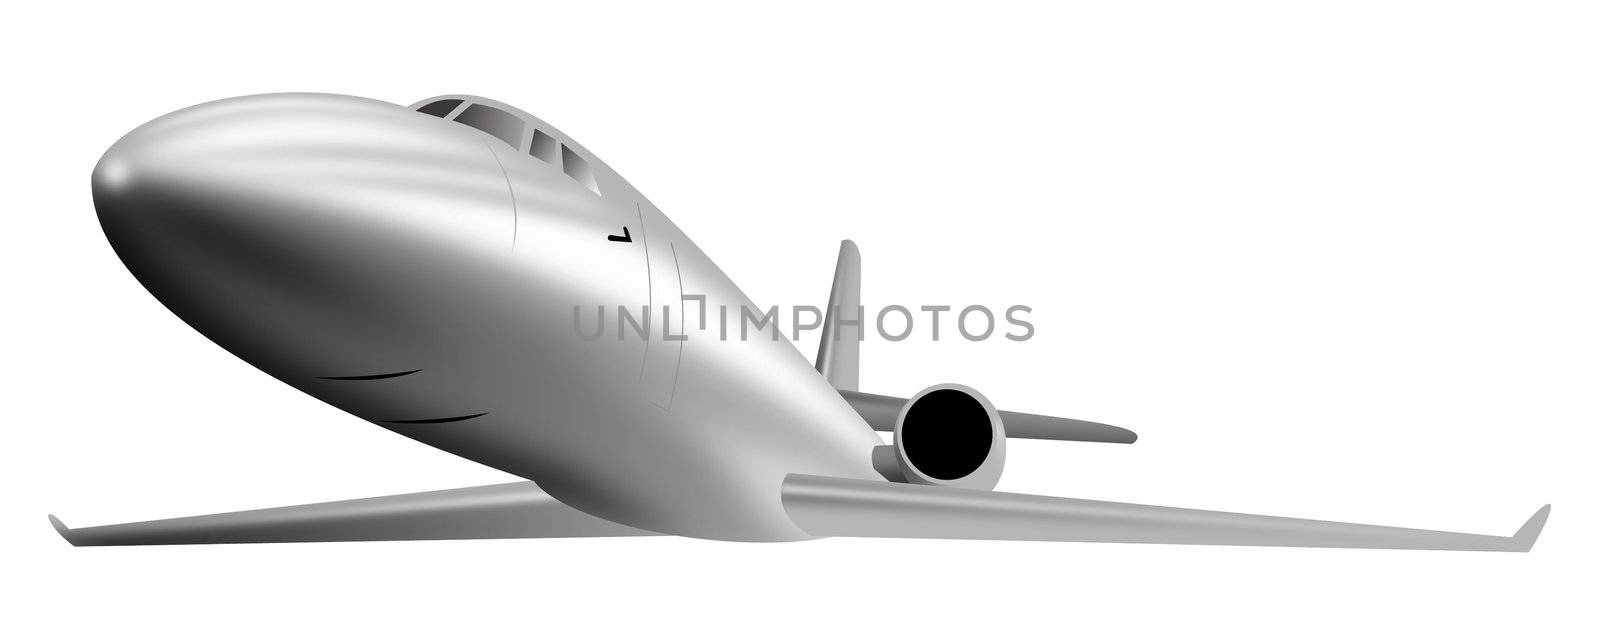 Illustration of corporate jet aircraft in full flight on isolated white background.